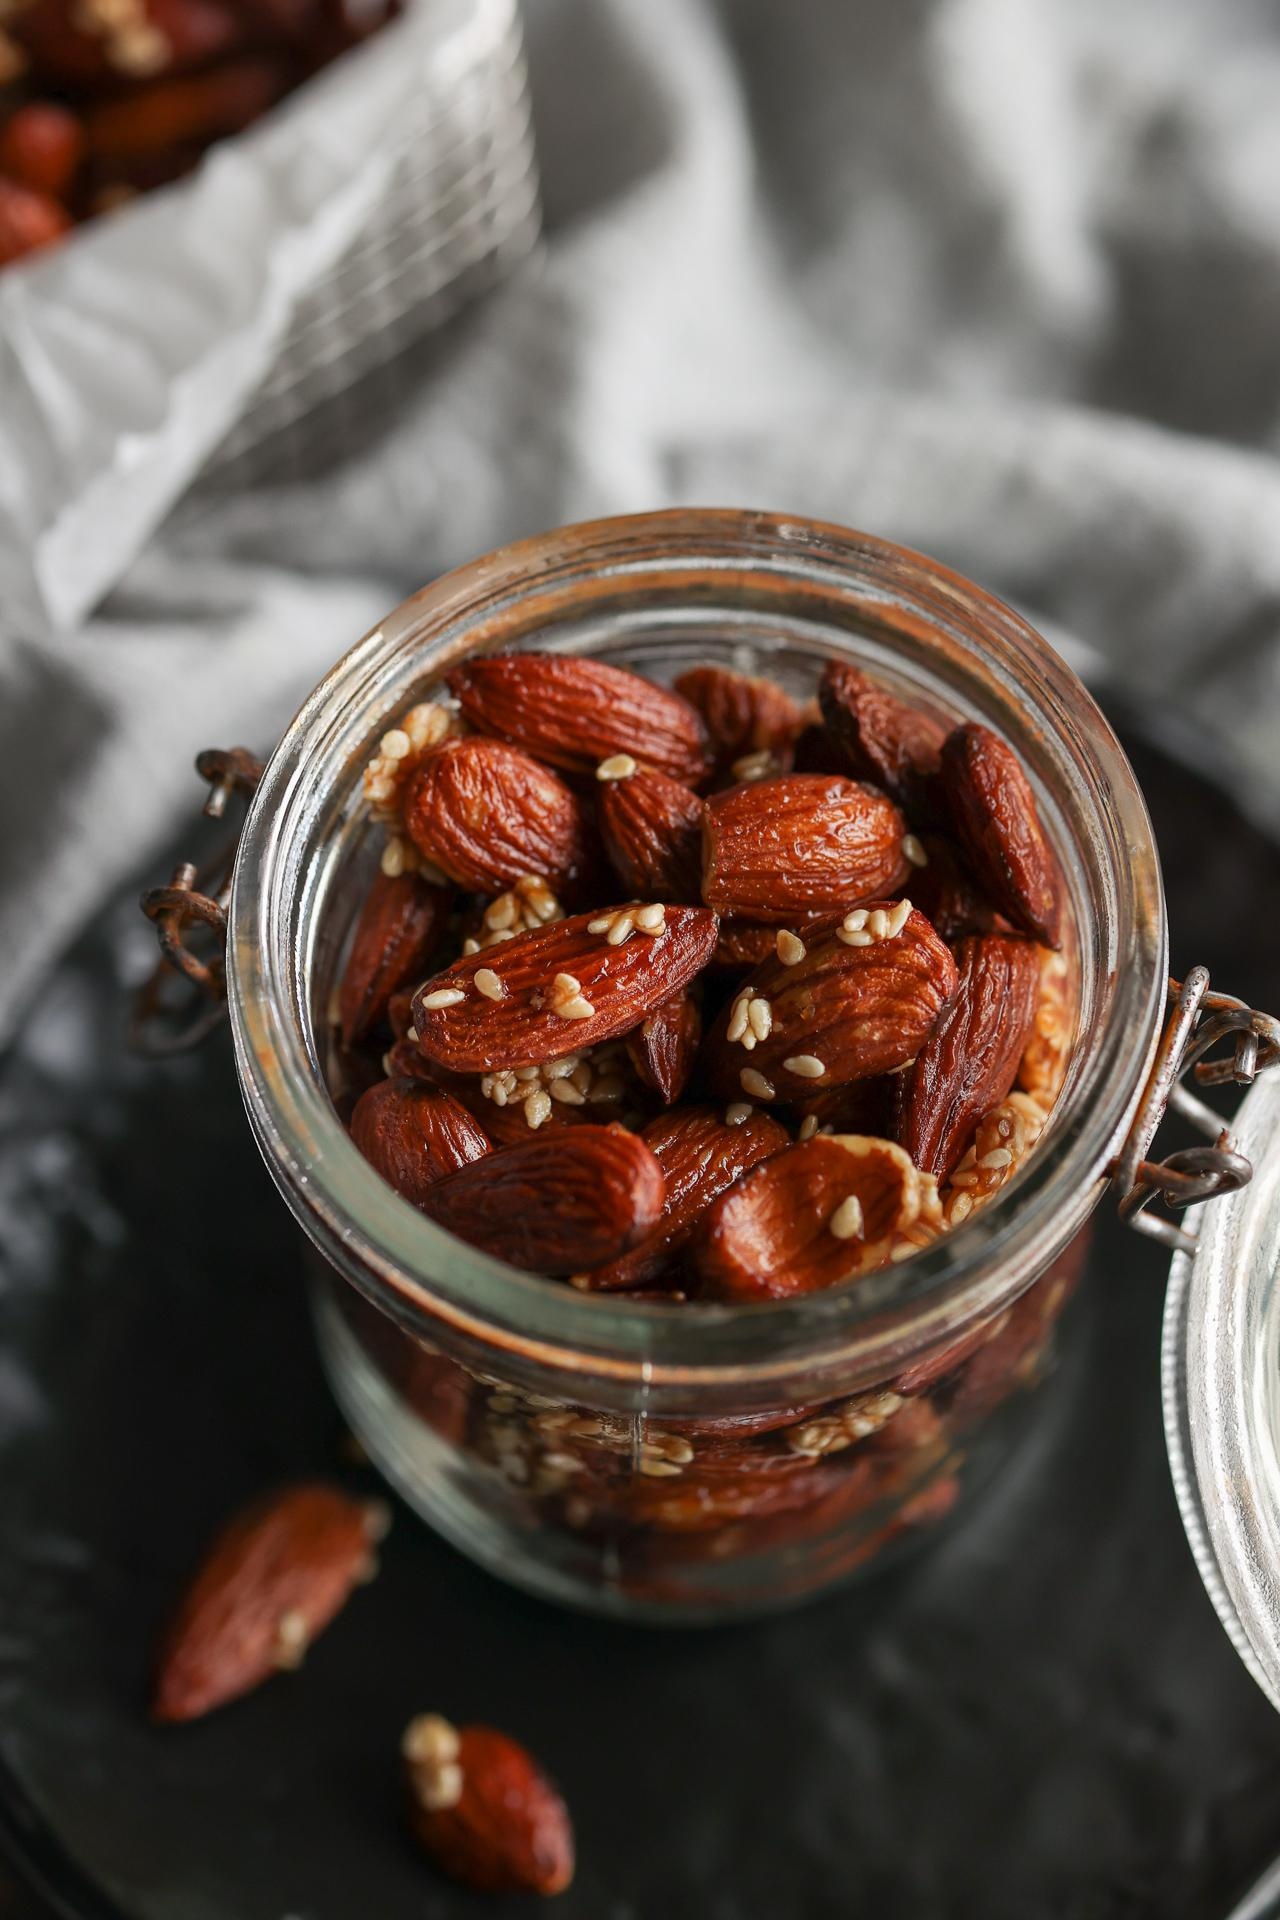 Almonds: A highly nutritional nut, A rich source of energy, fiber, protein. 1280x1920 HD Background.